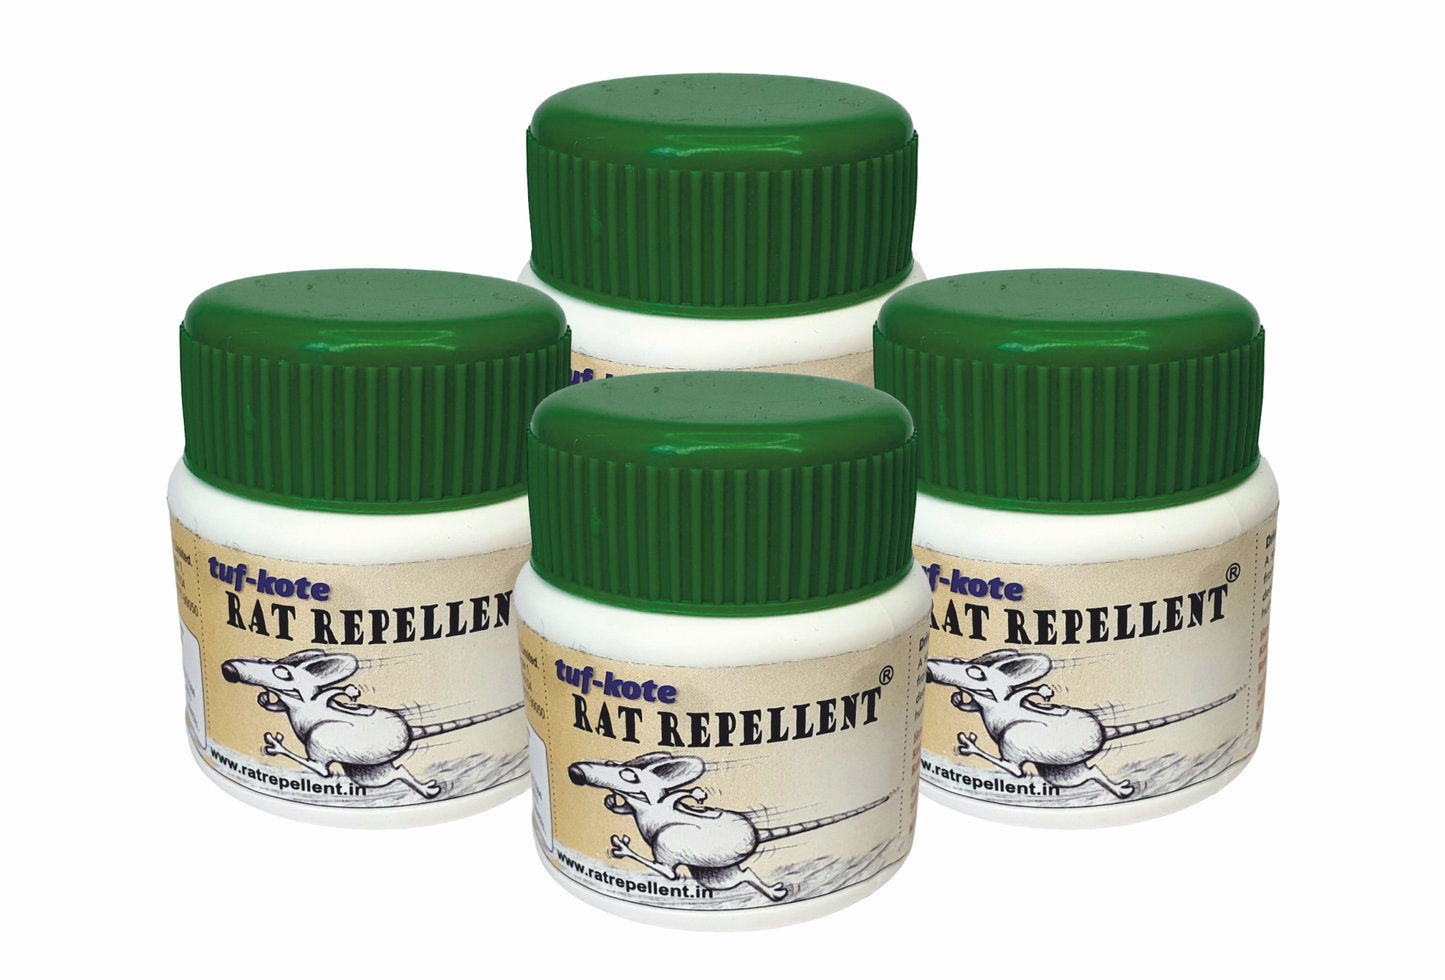 tuf-kote® Herbal Rat Repellent, Non-Poisonous, Lasts for upto 90 days, Drive Away Rats Without Killing Them - 20gms